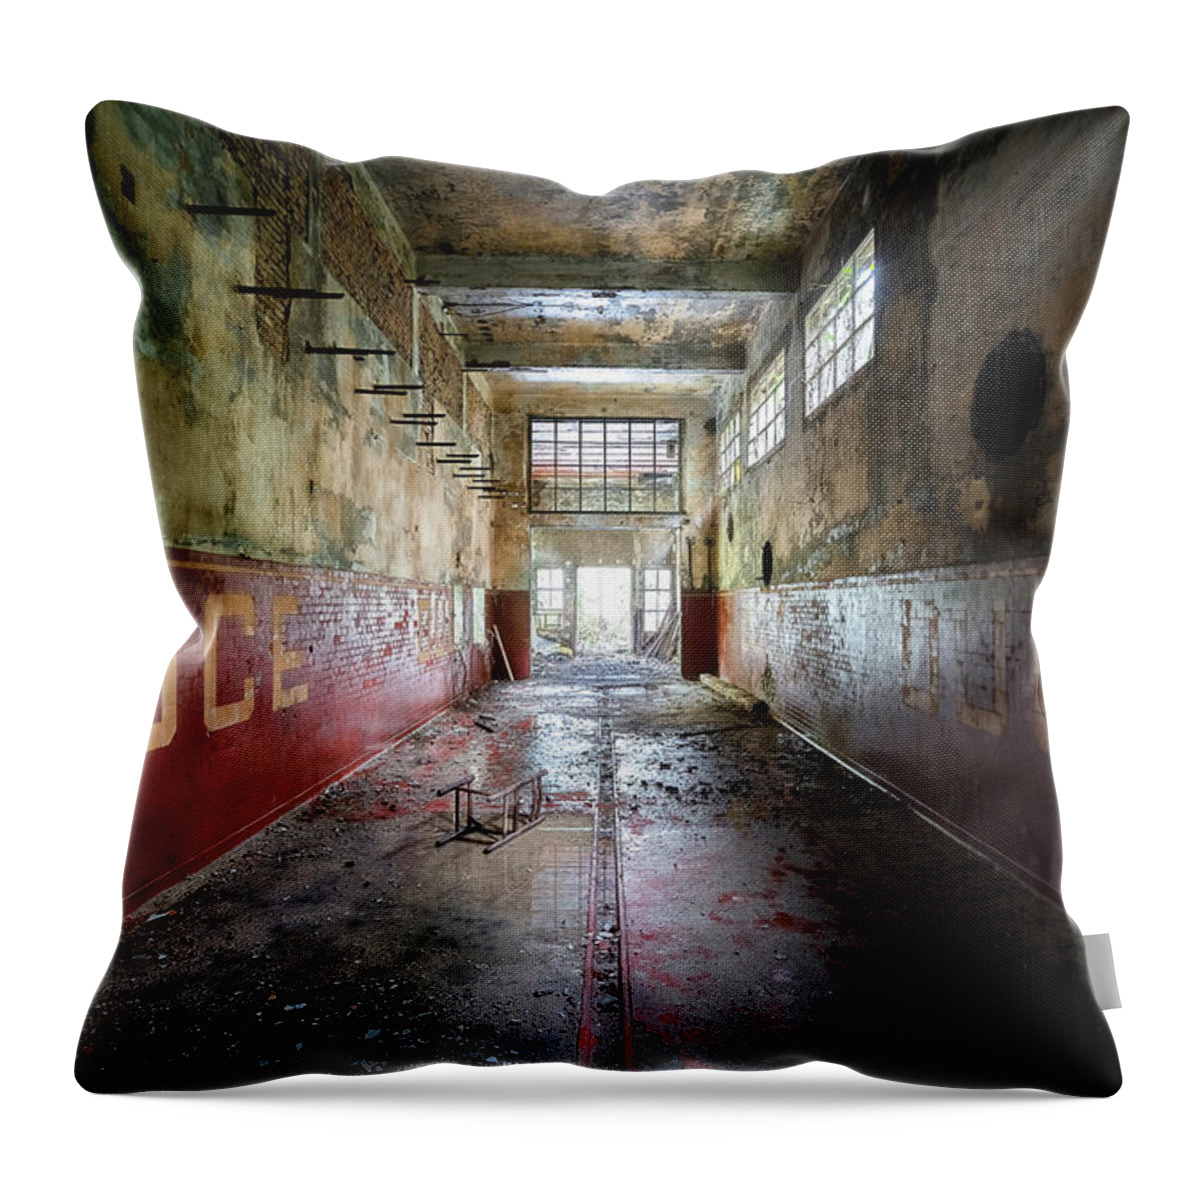 Urban Throw Pillow featuring the photograph Dark and Abandoned Hallway by Roman Robroek